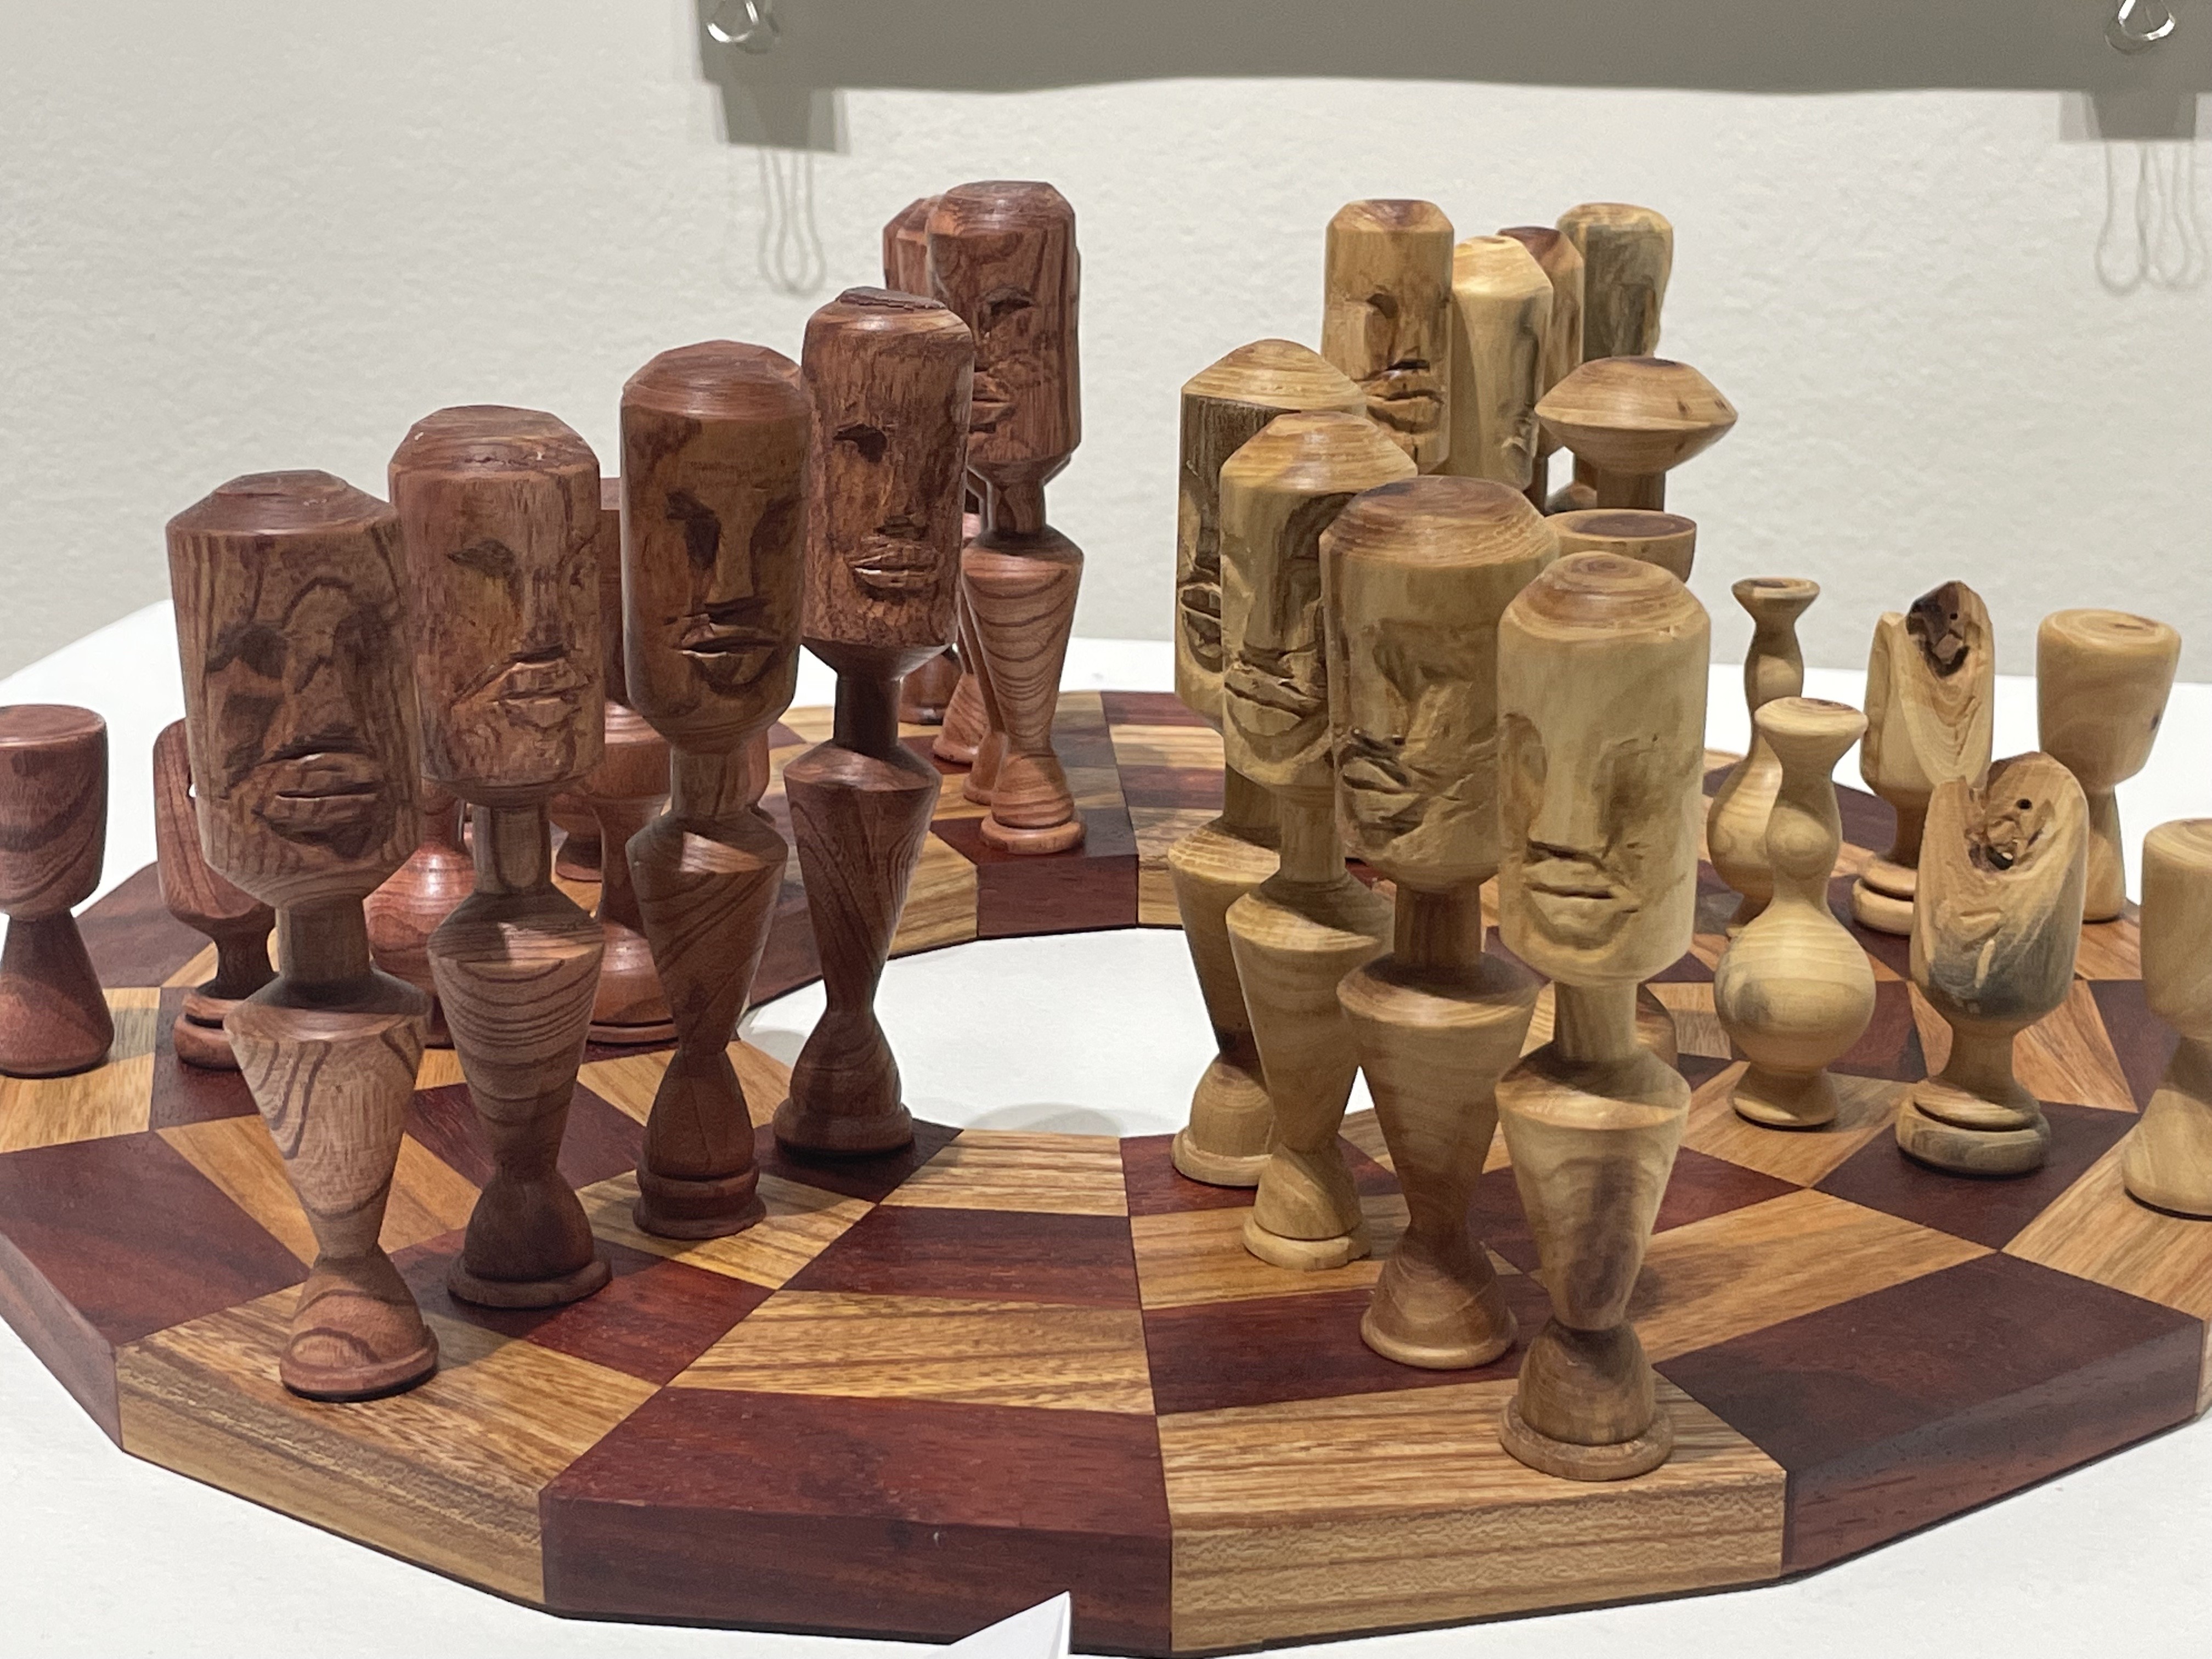 The Chess Game - Woodmere Art Museum